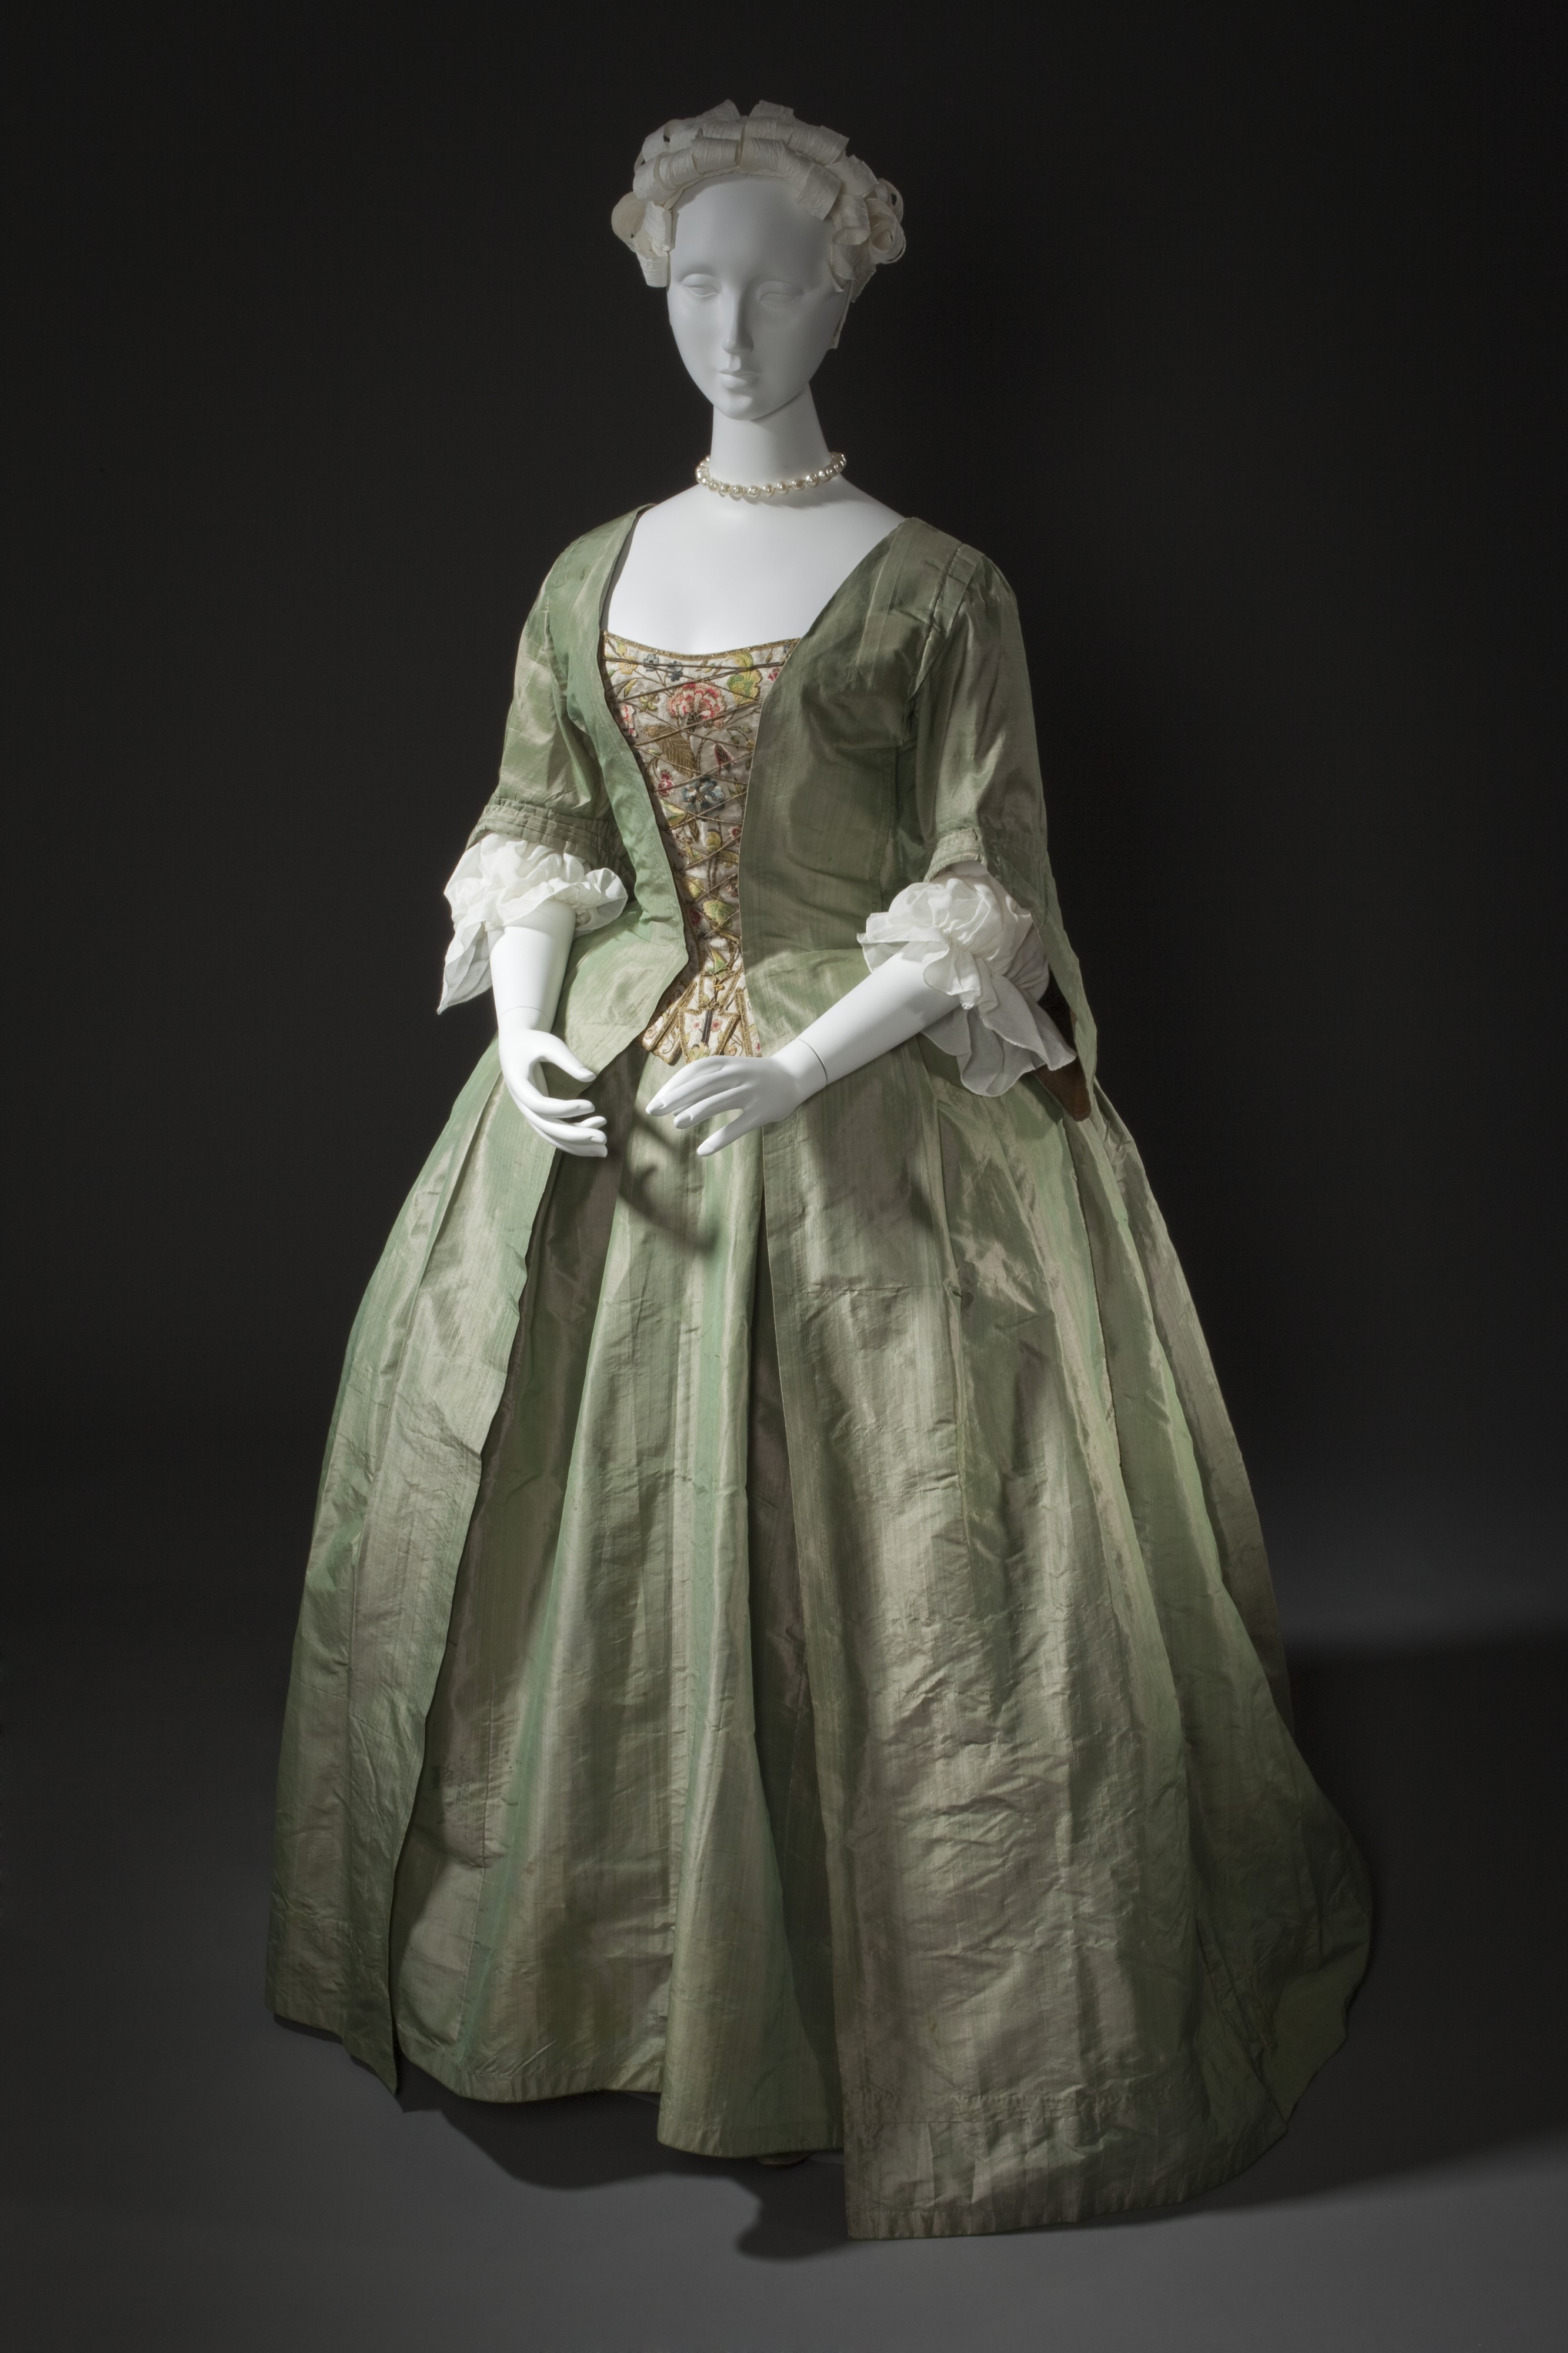 Robe a la Française and embroidered stomacher